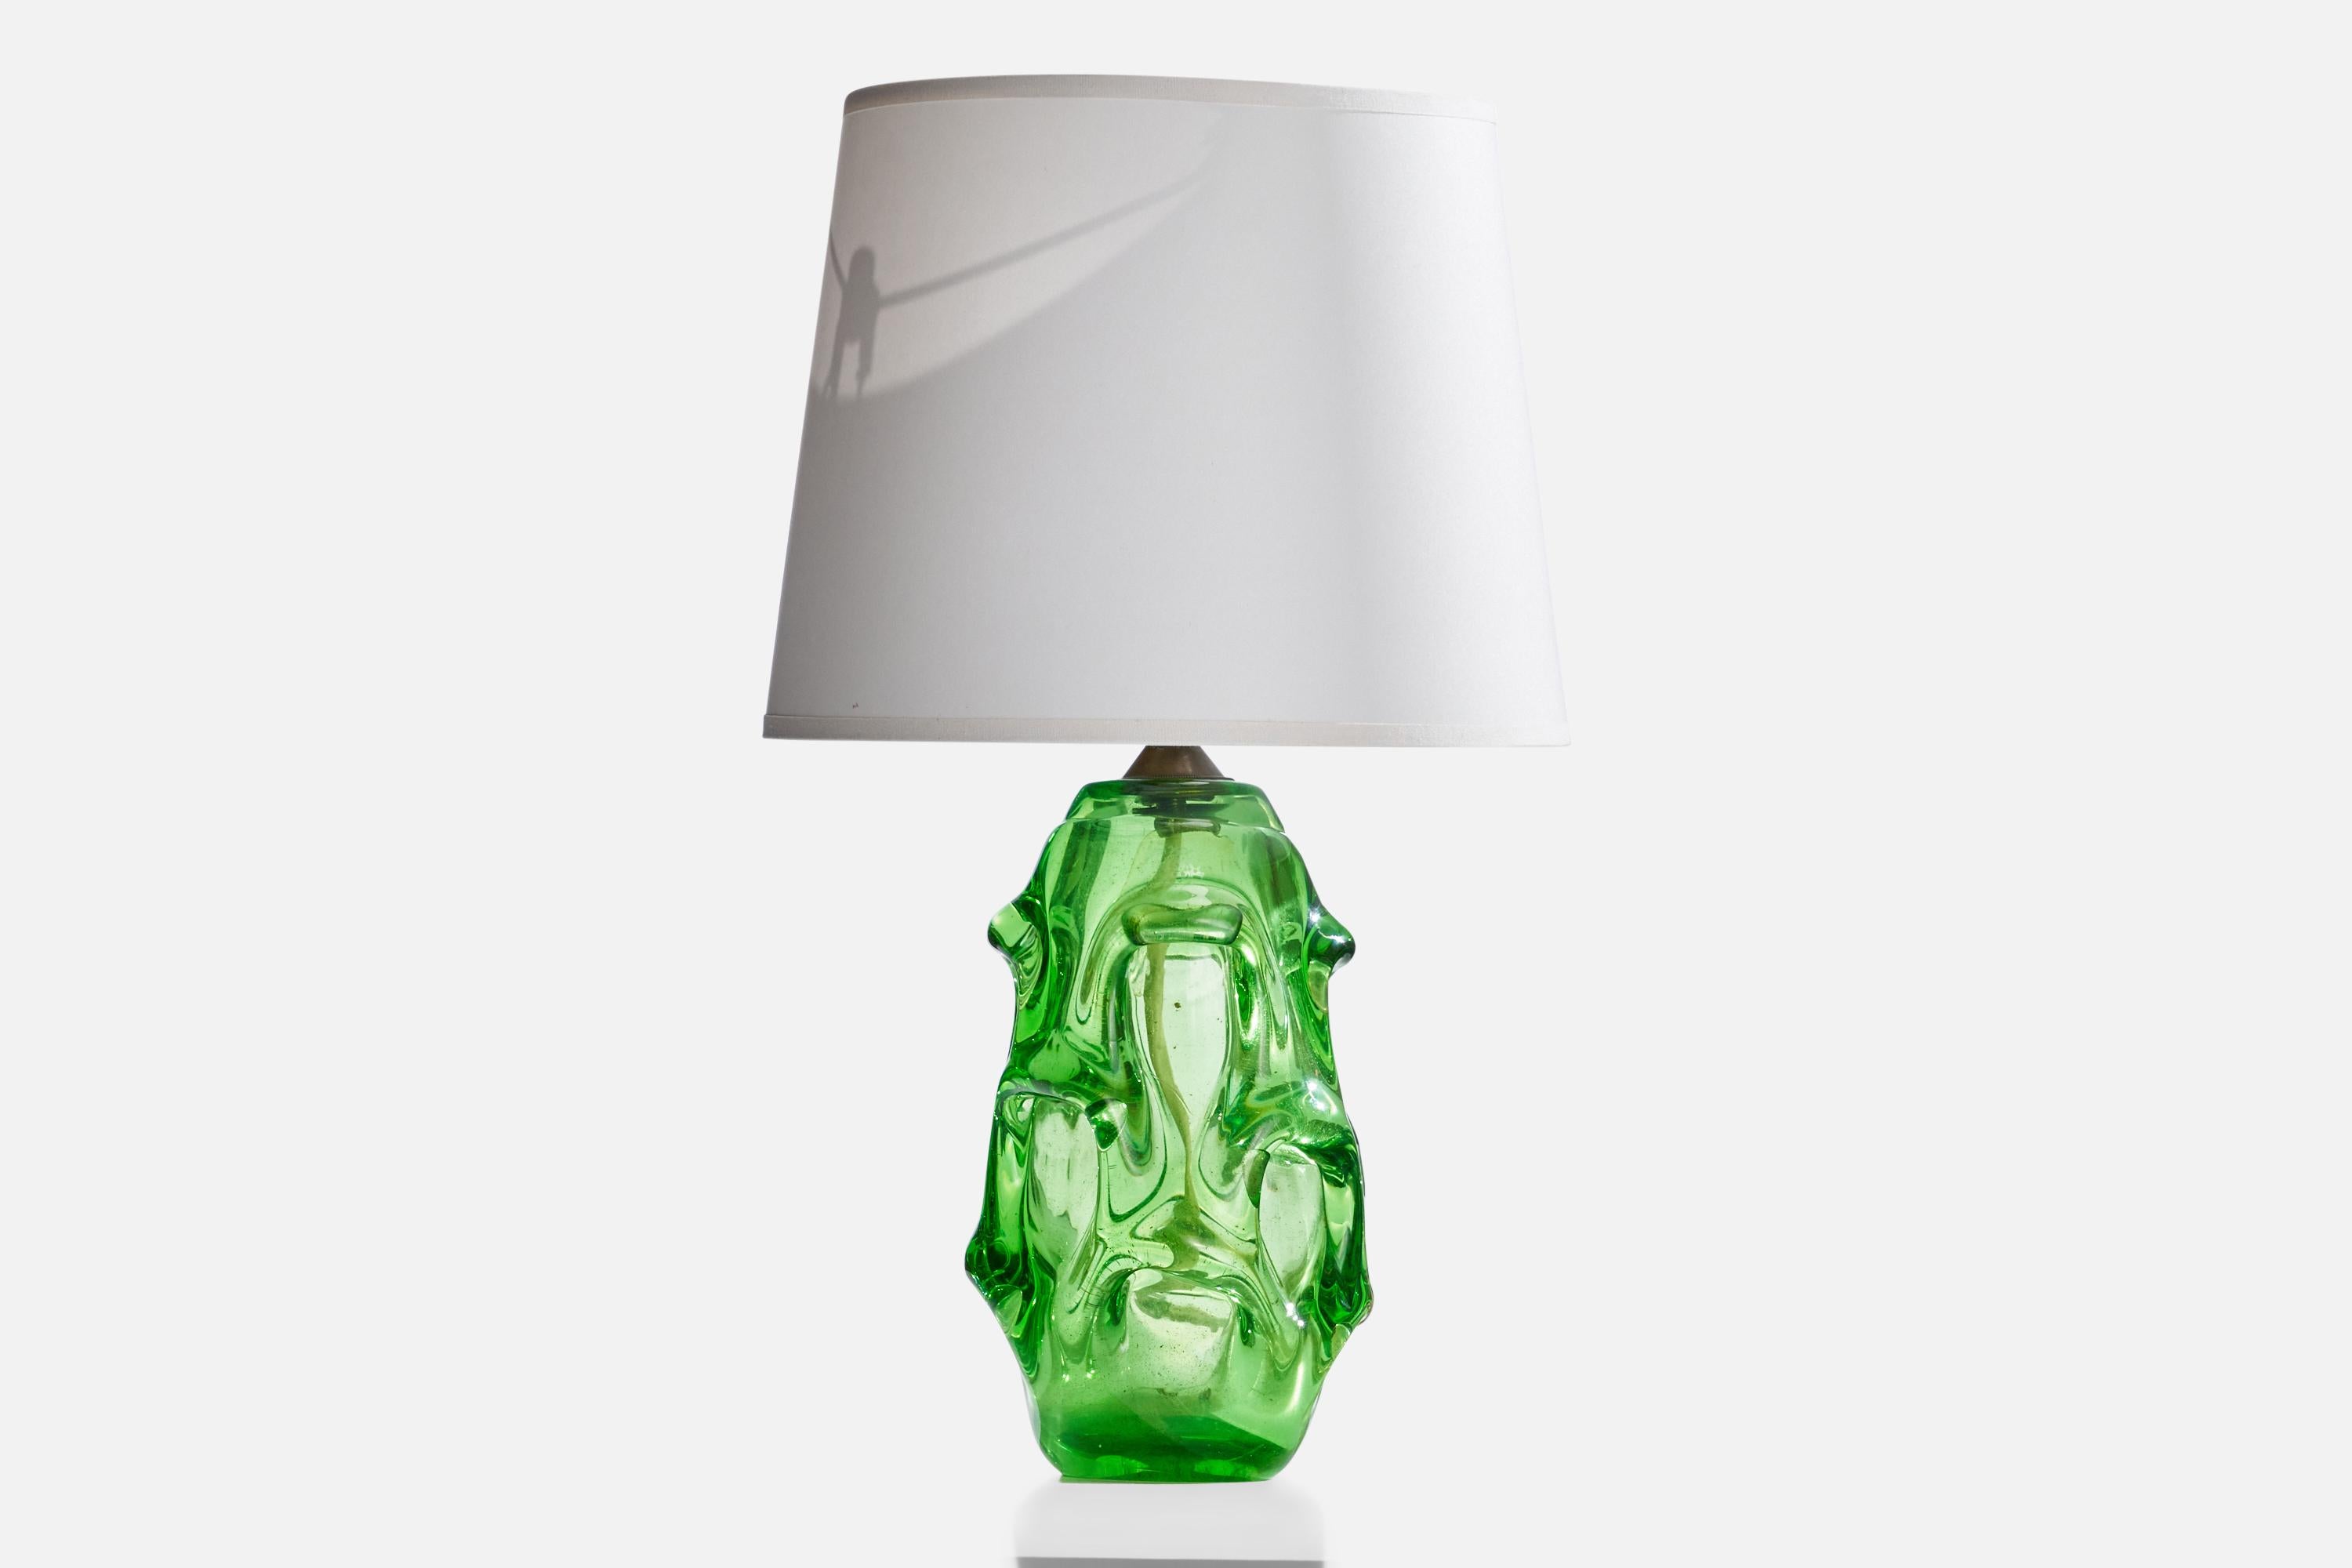 A green blown glass and brass table lamp designed by Börne Augustsson and produced by Åseda Glasbruk, Sweden, 1940s.

Dimensions of Lamp (inches): 13”  H x 4.5” Diameter
Dimensions of Shade (inches): 8” Top Diameter x 10” Bottom Diameter x 8”